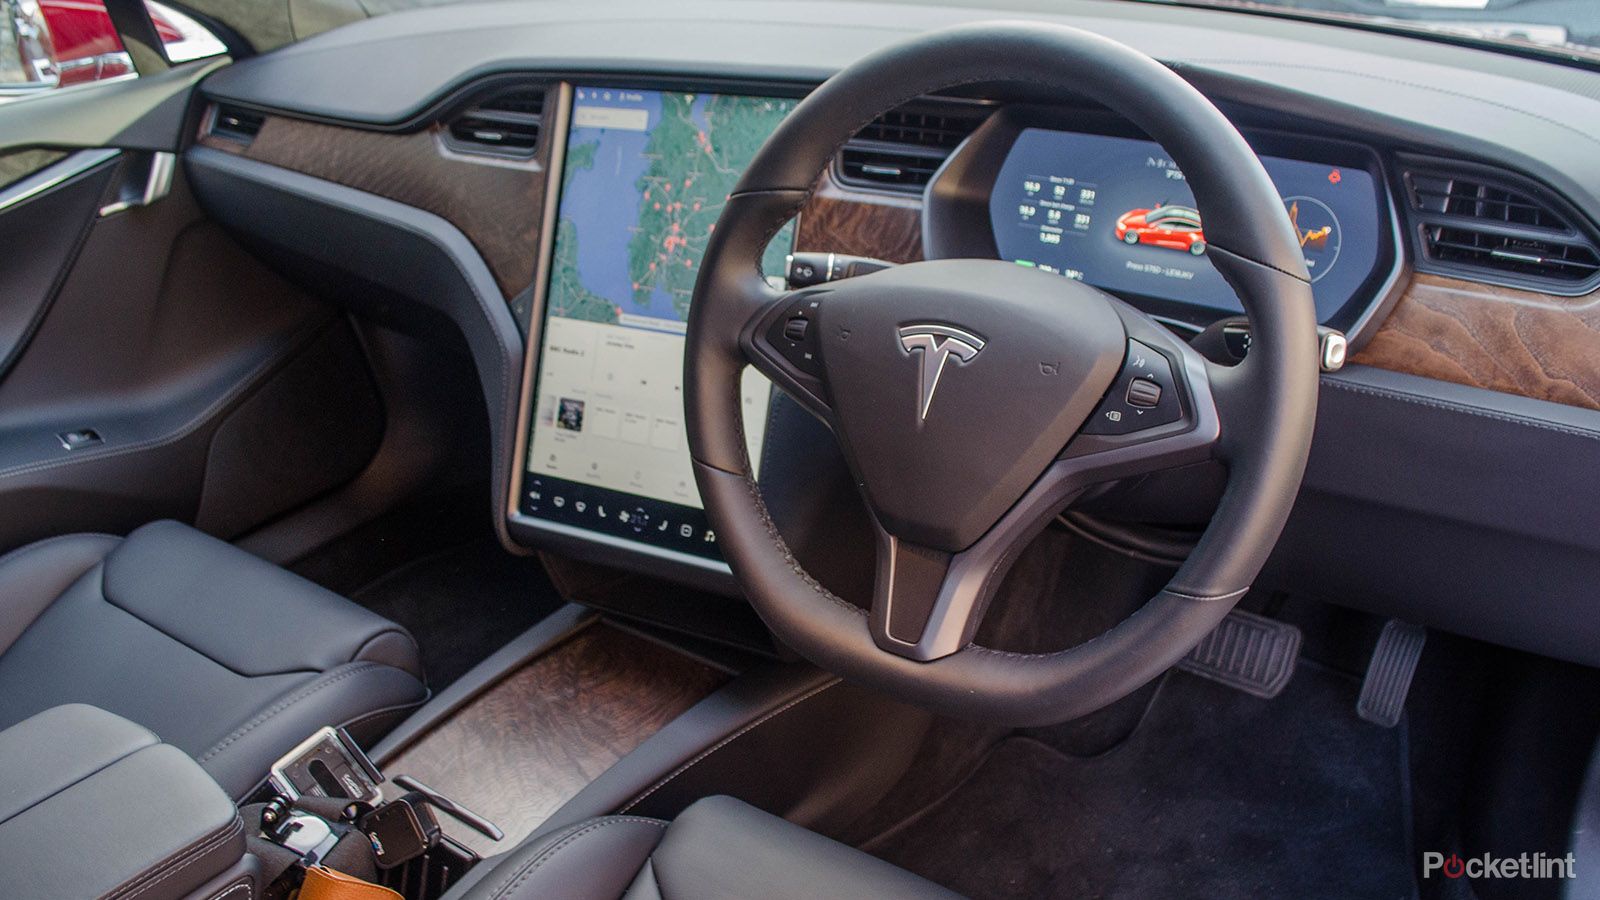 Tesla says itll have a million robotaxis on the road in 2020 image 1